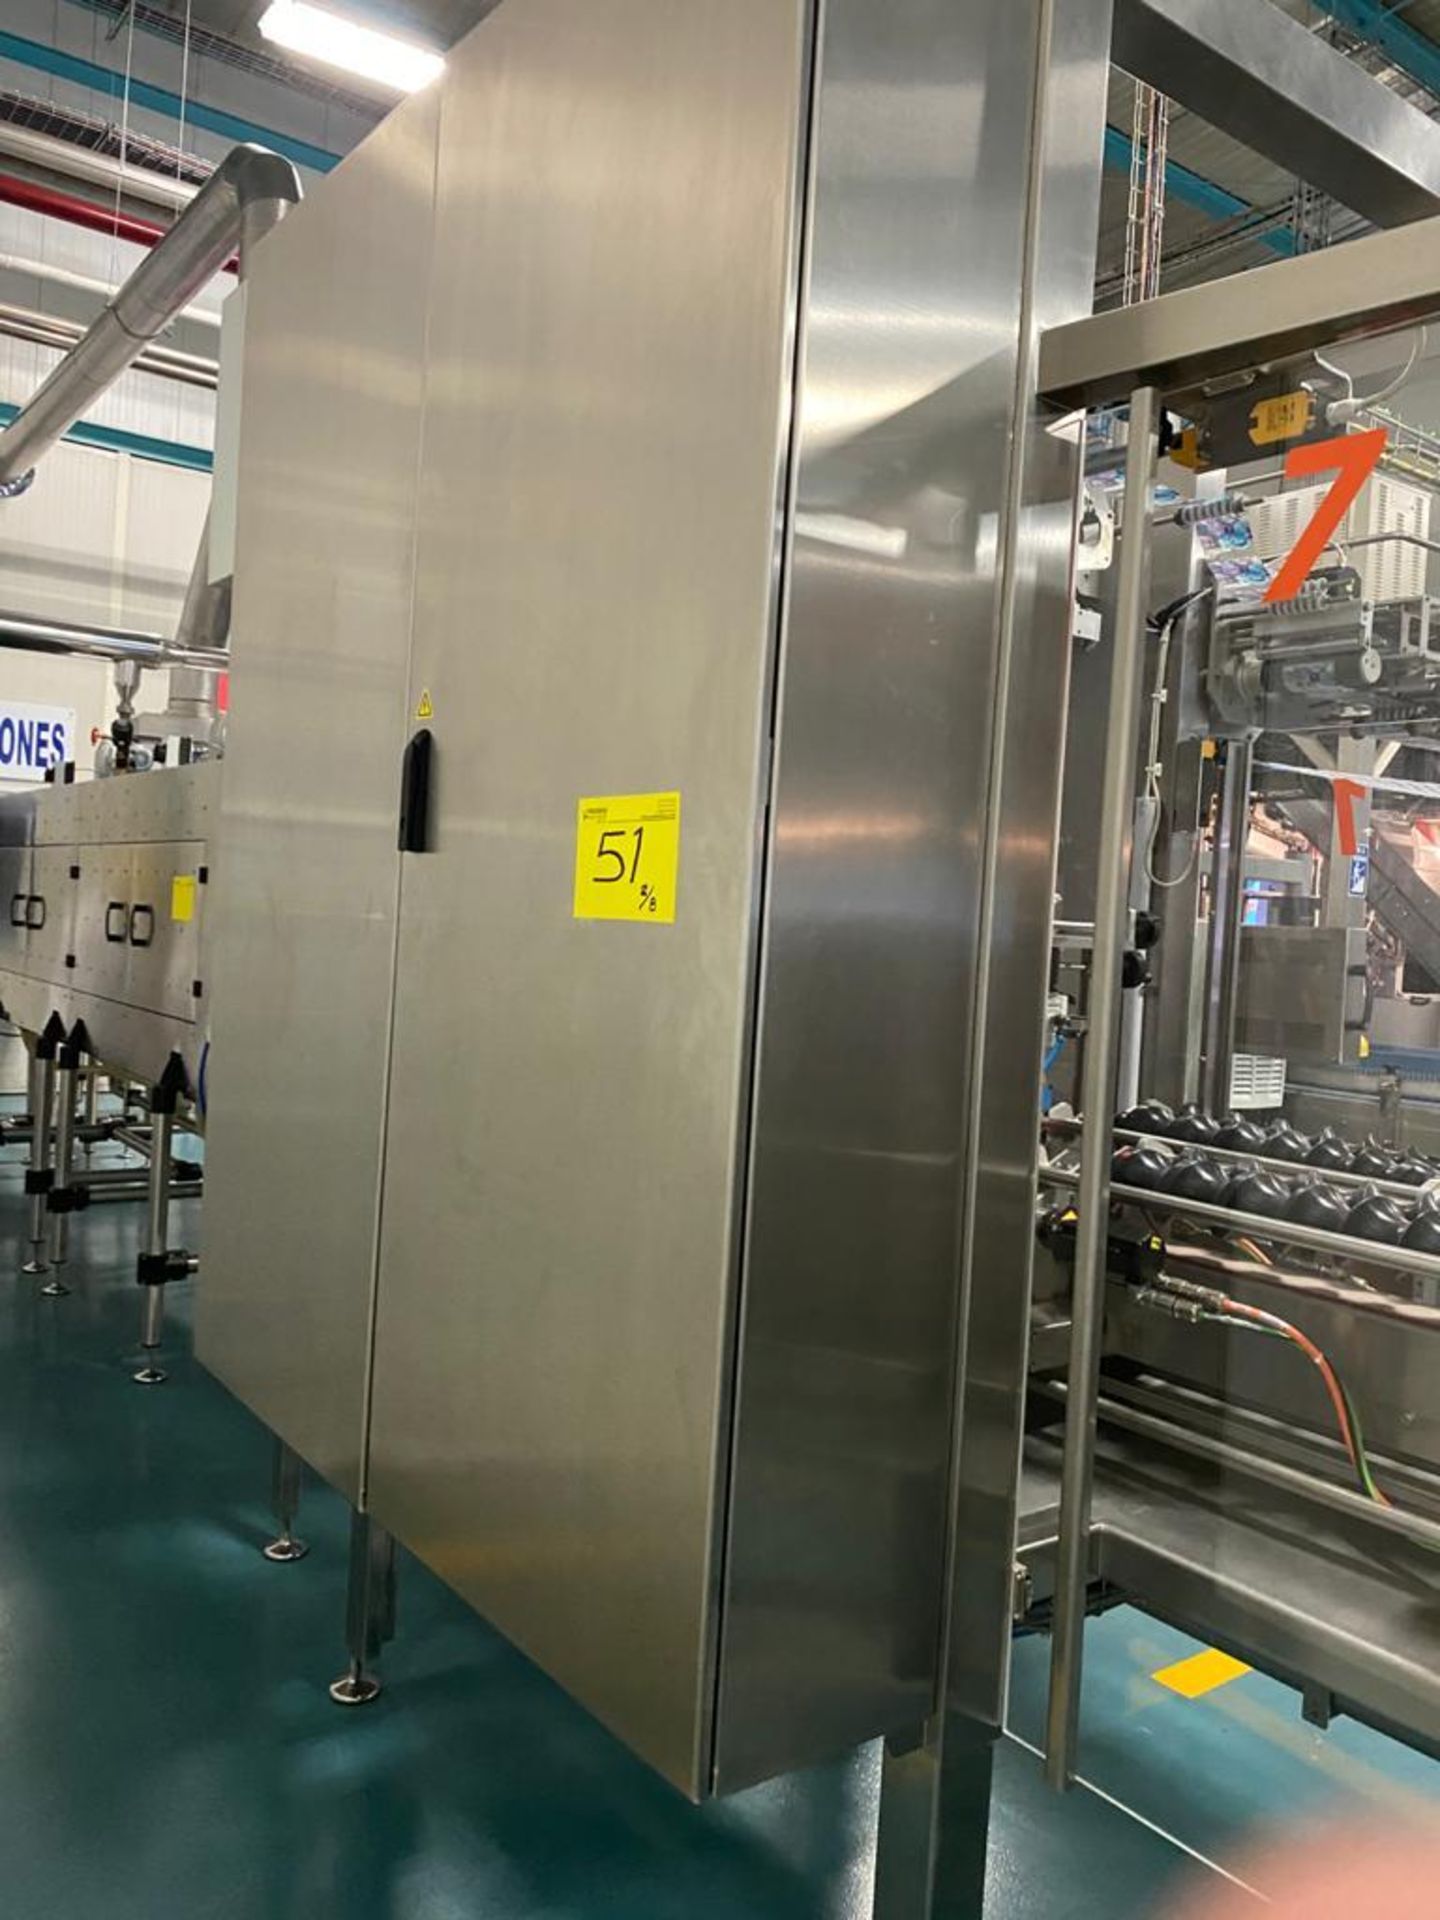 2019 Sleeve Technology Shrink Sleeve Labeling Line, S/N1902079, Consist of Bottle Air Drying Tunnel - Image 33 of 50